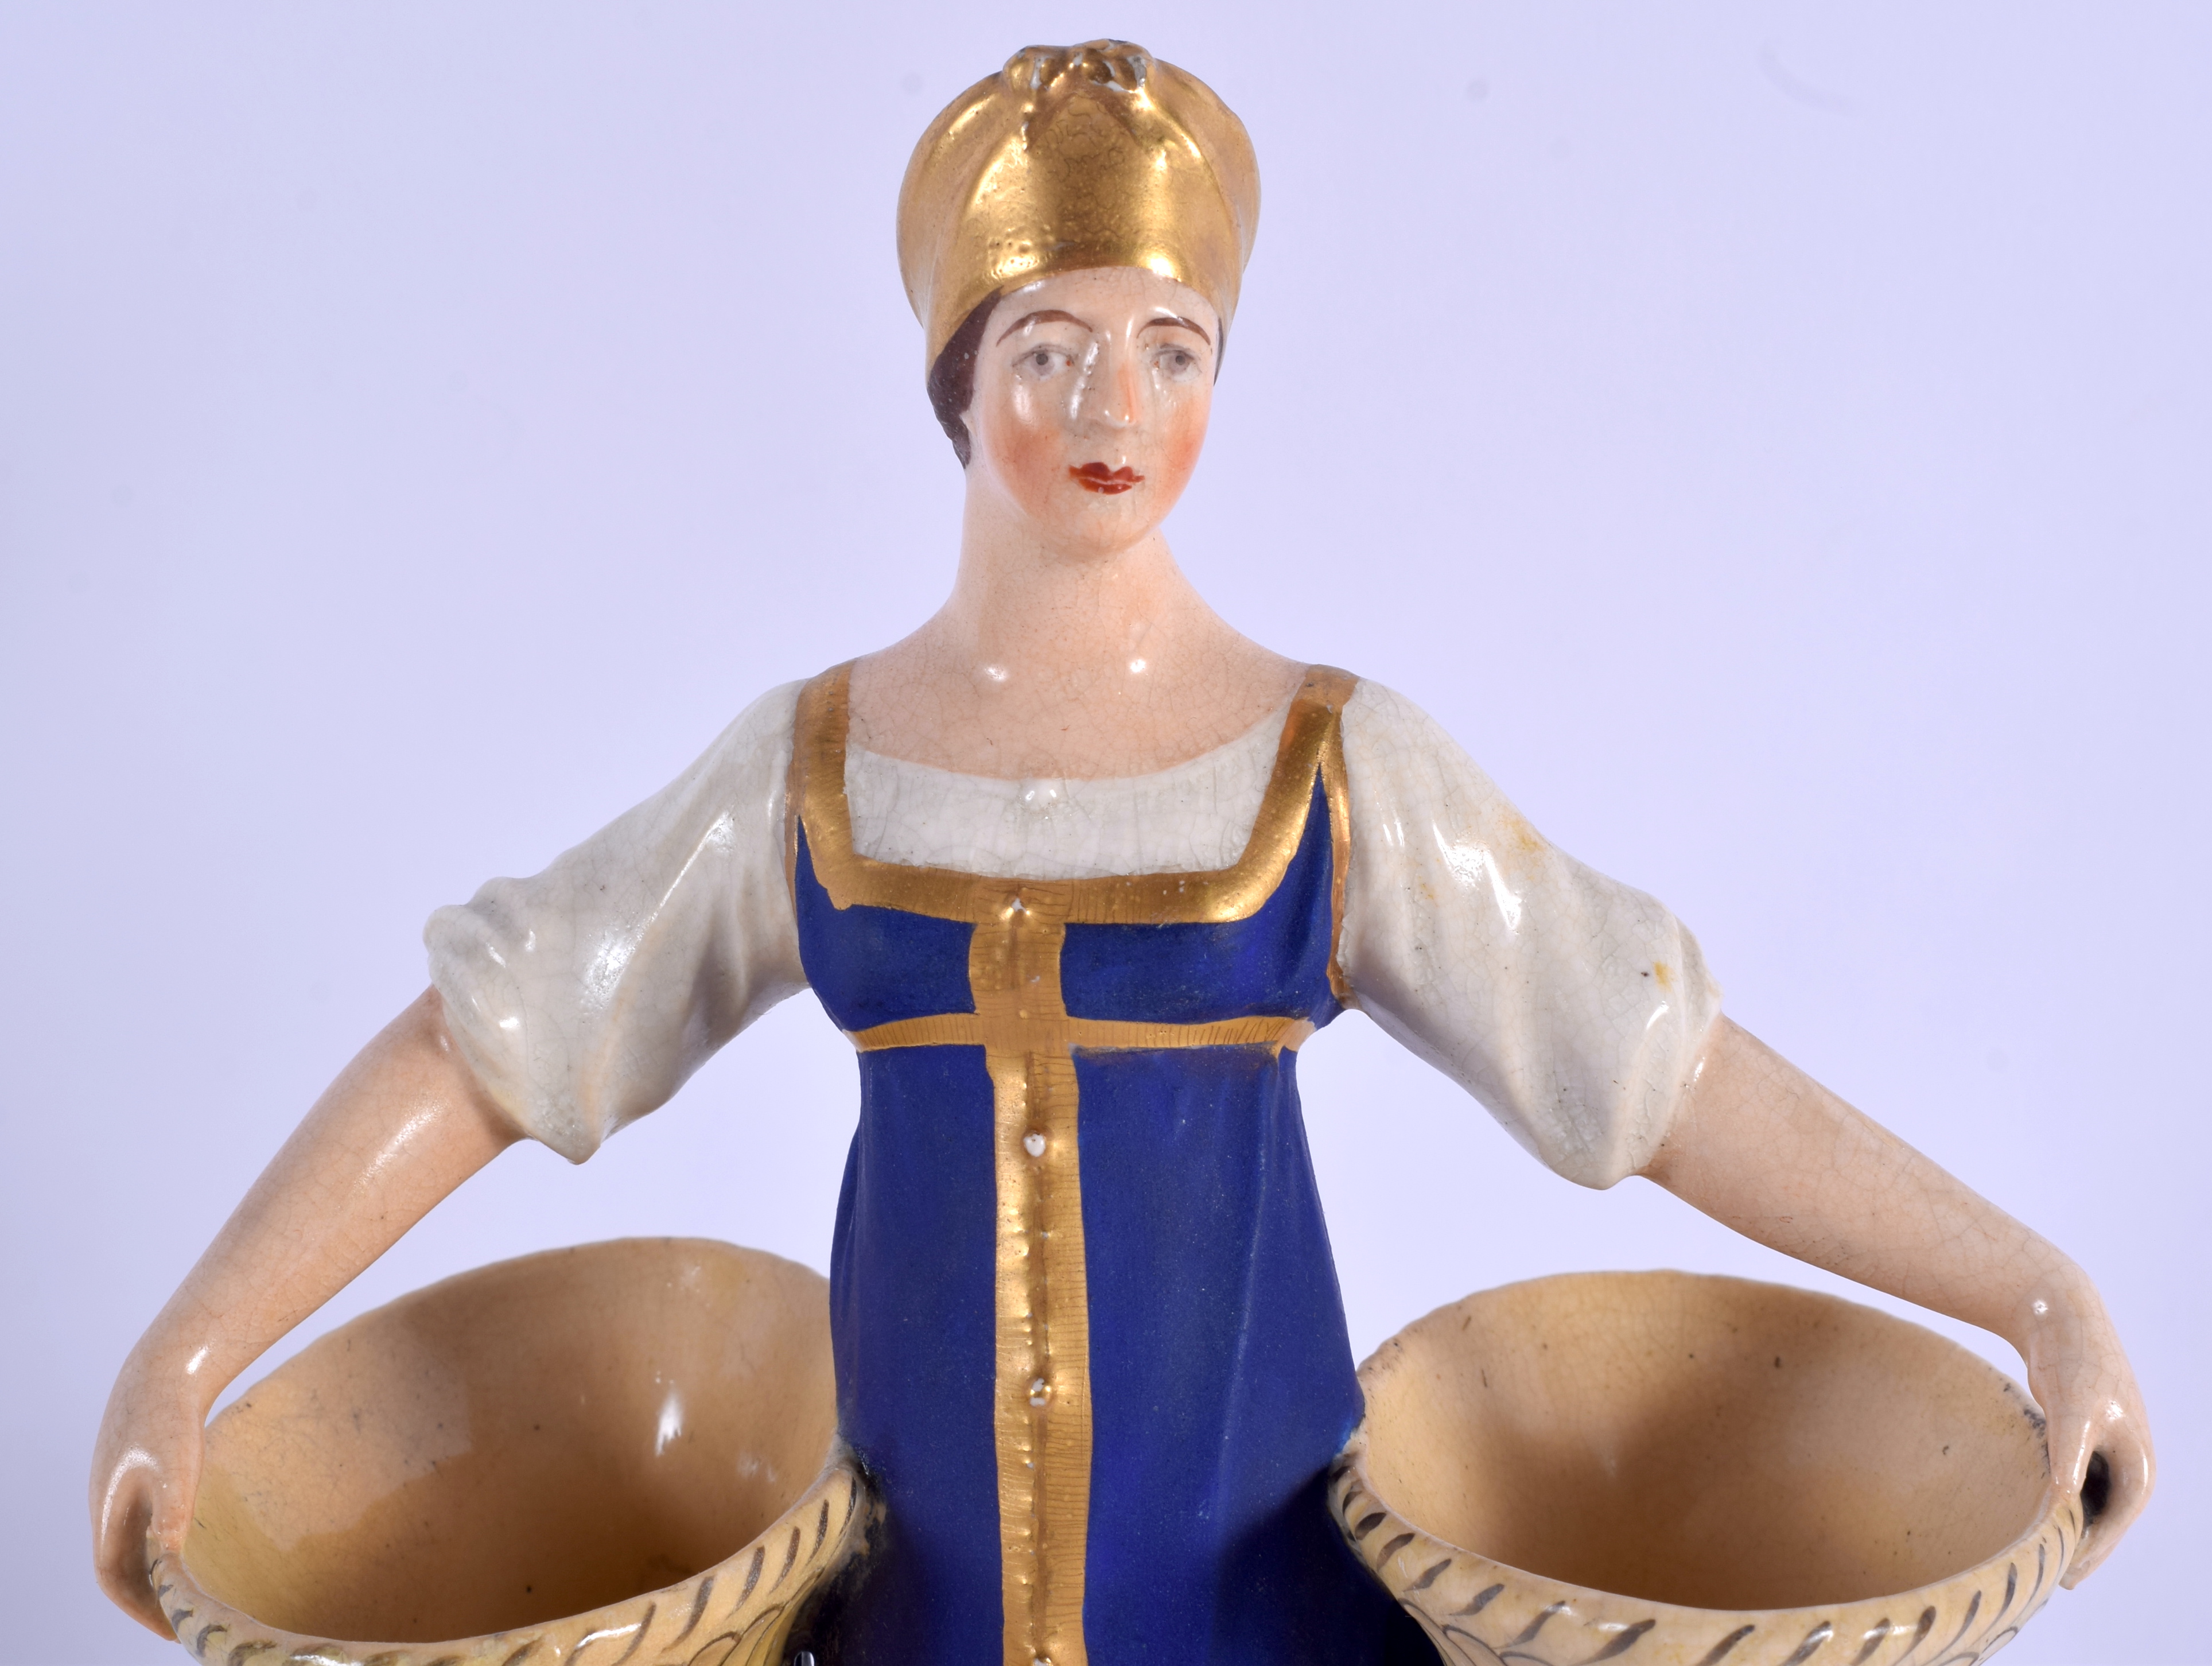 A VERY RARE EARLY 19TH CENTURY RUSSIAN PORCELAIN FIGURE OF A WOMEN probably Gardner Factory, Verbilk - Image 2 of 10